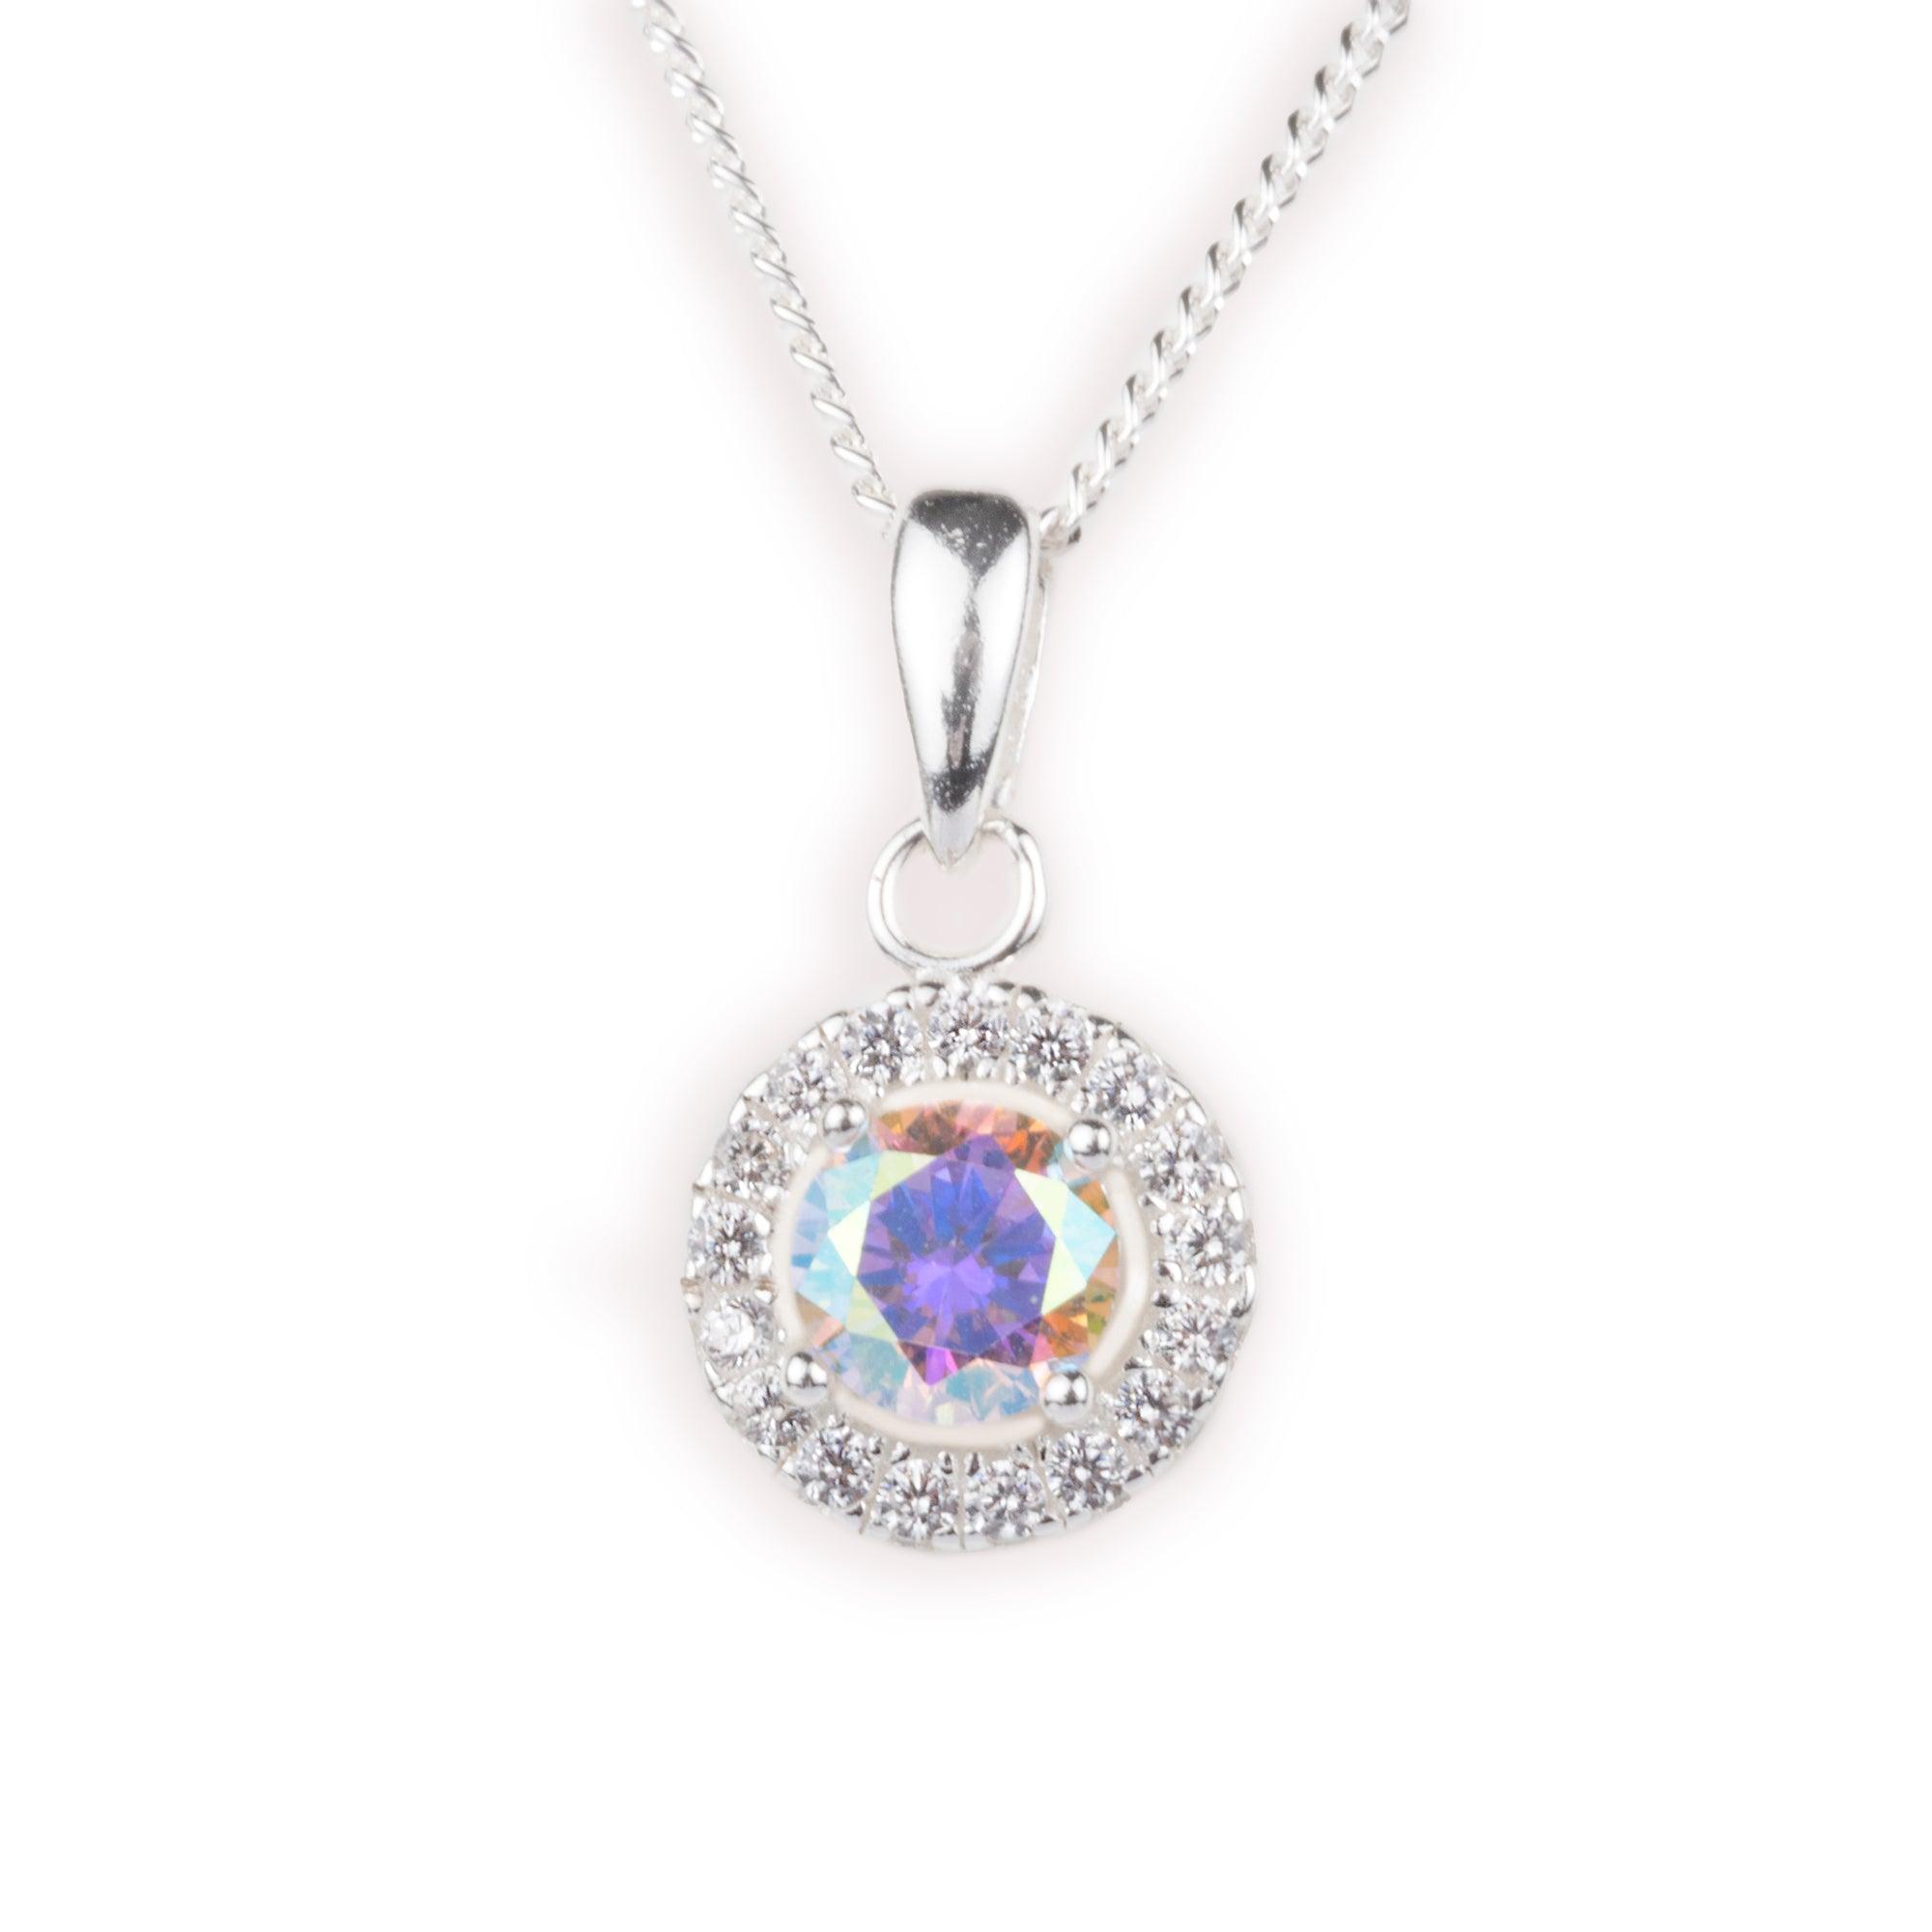 Sterling Silver Halo Cubic Zirconia Pendant with Chain Set SP836B - Minar Jewellers